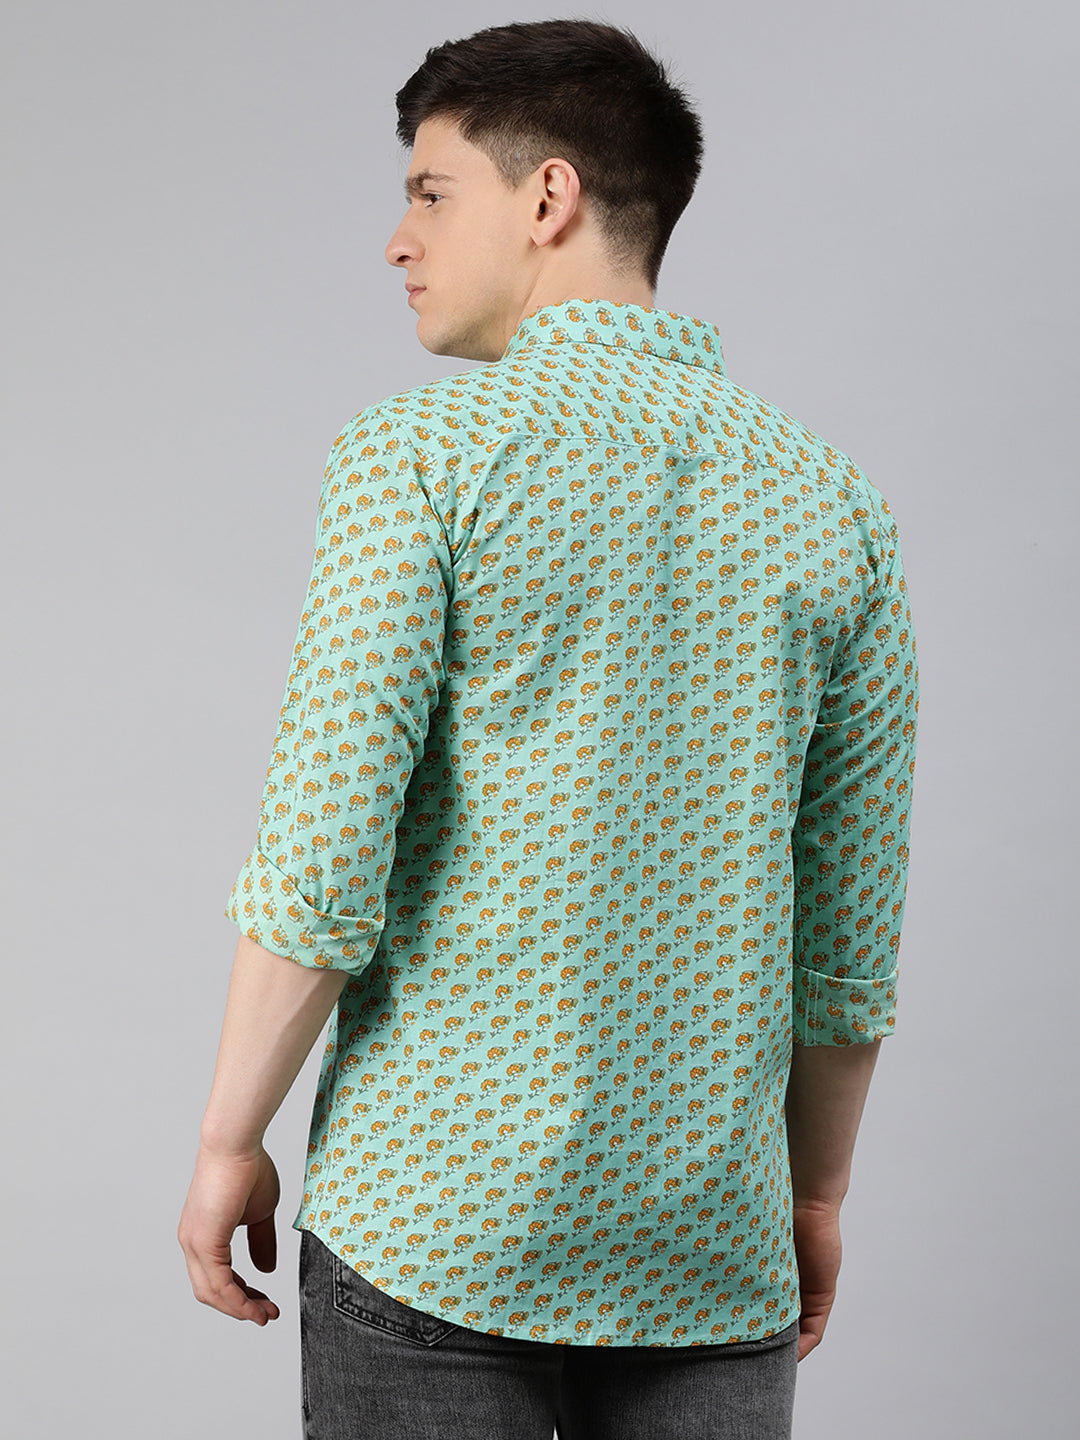 Sea Green Cotton Full Sleeves Shirts For Men